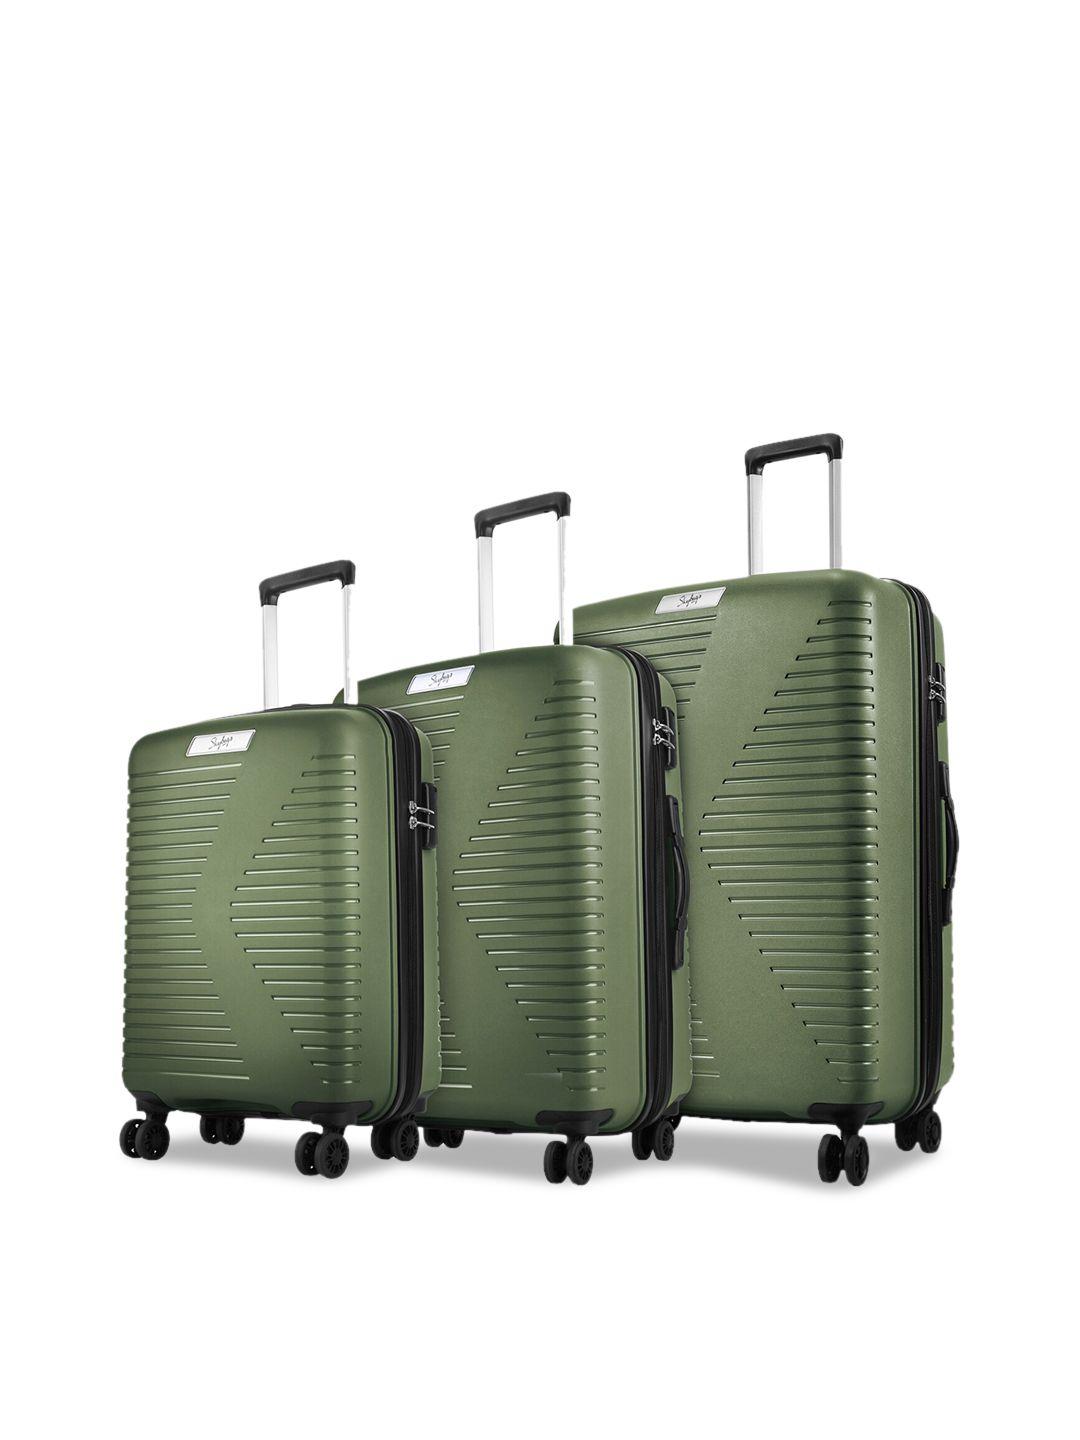 skybags set of 3 olive green solid hard-sided trolley suitcases